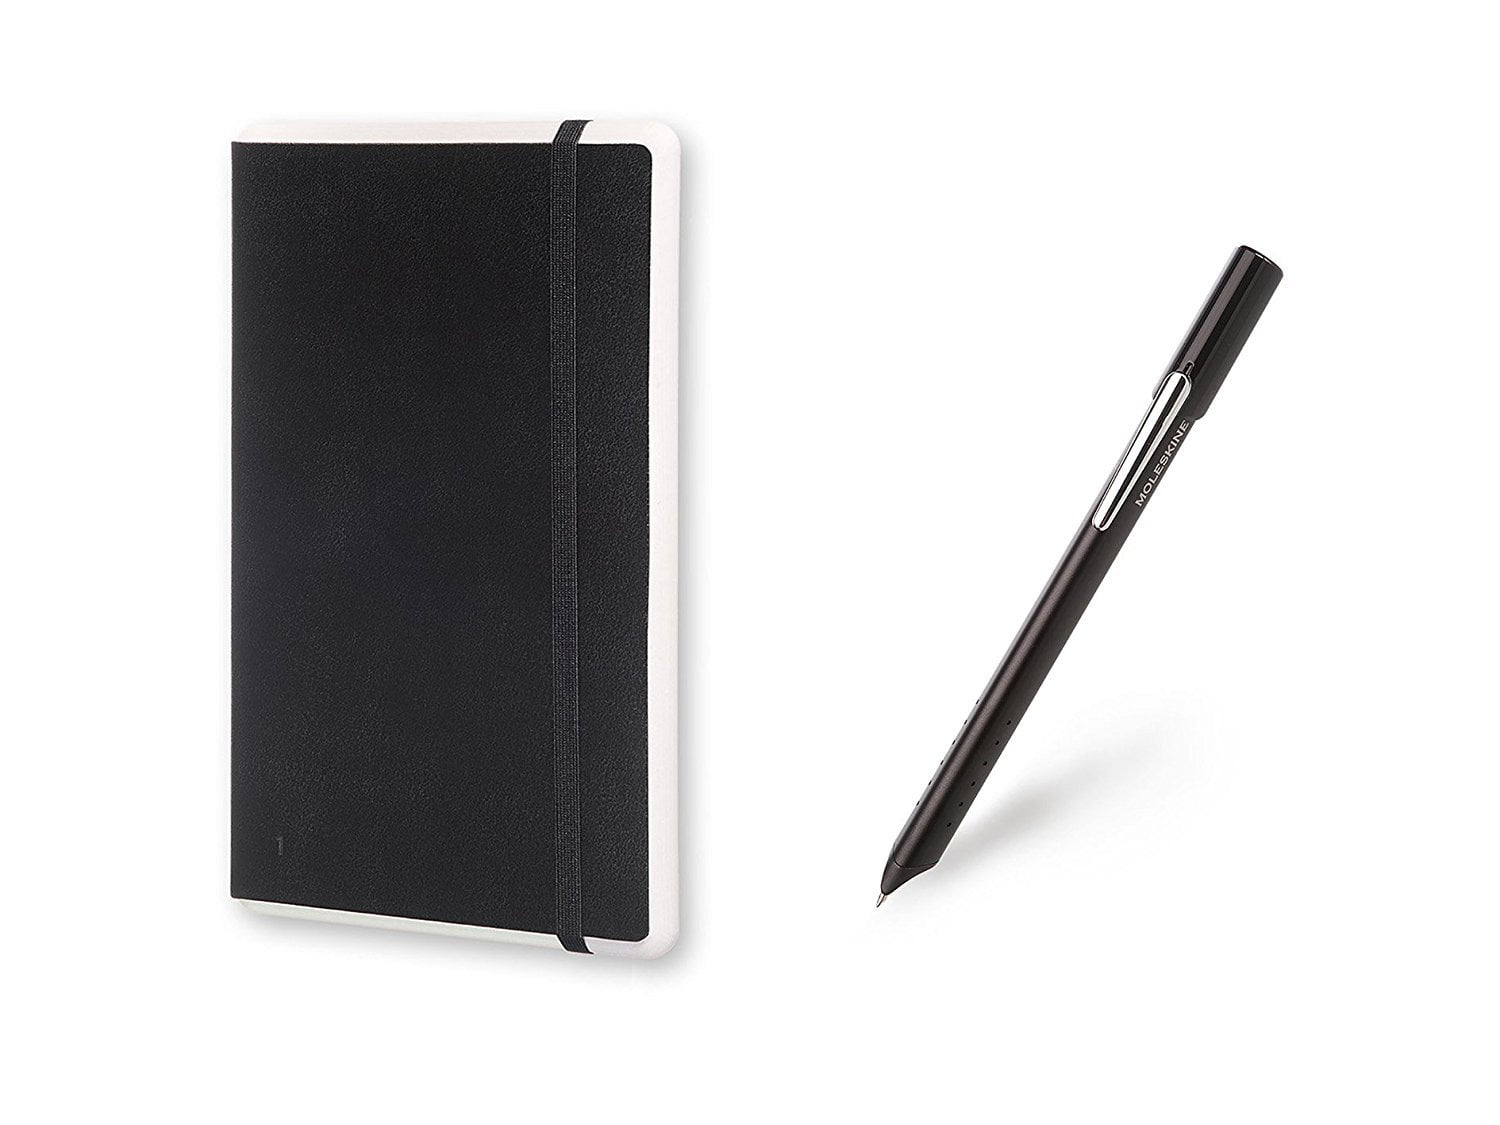 Moleskine Pen+ Smart Writing Set Pen & Dotted Smart Notebook - Use with  Moleskine App for Digitally Storing Notes (Only compatible with Moleskine